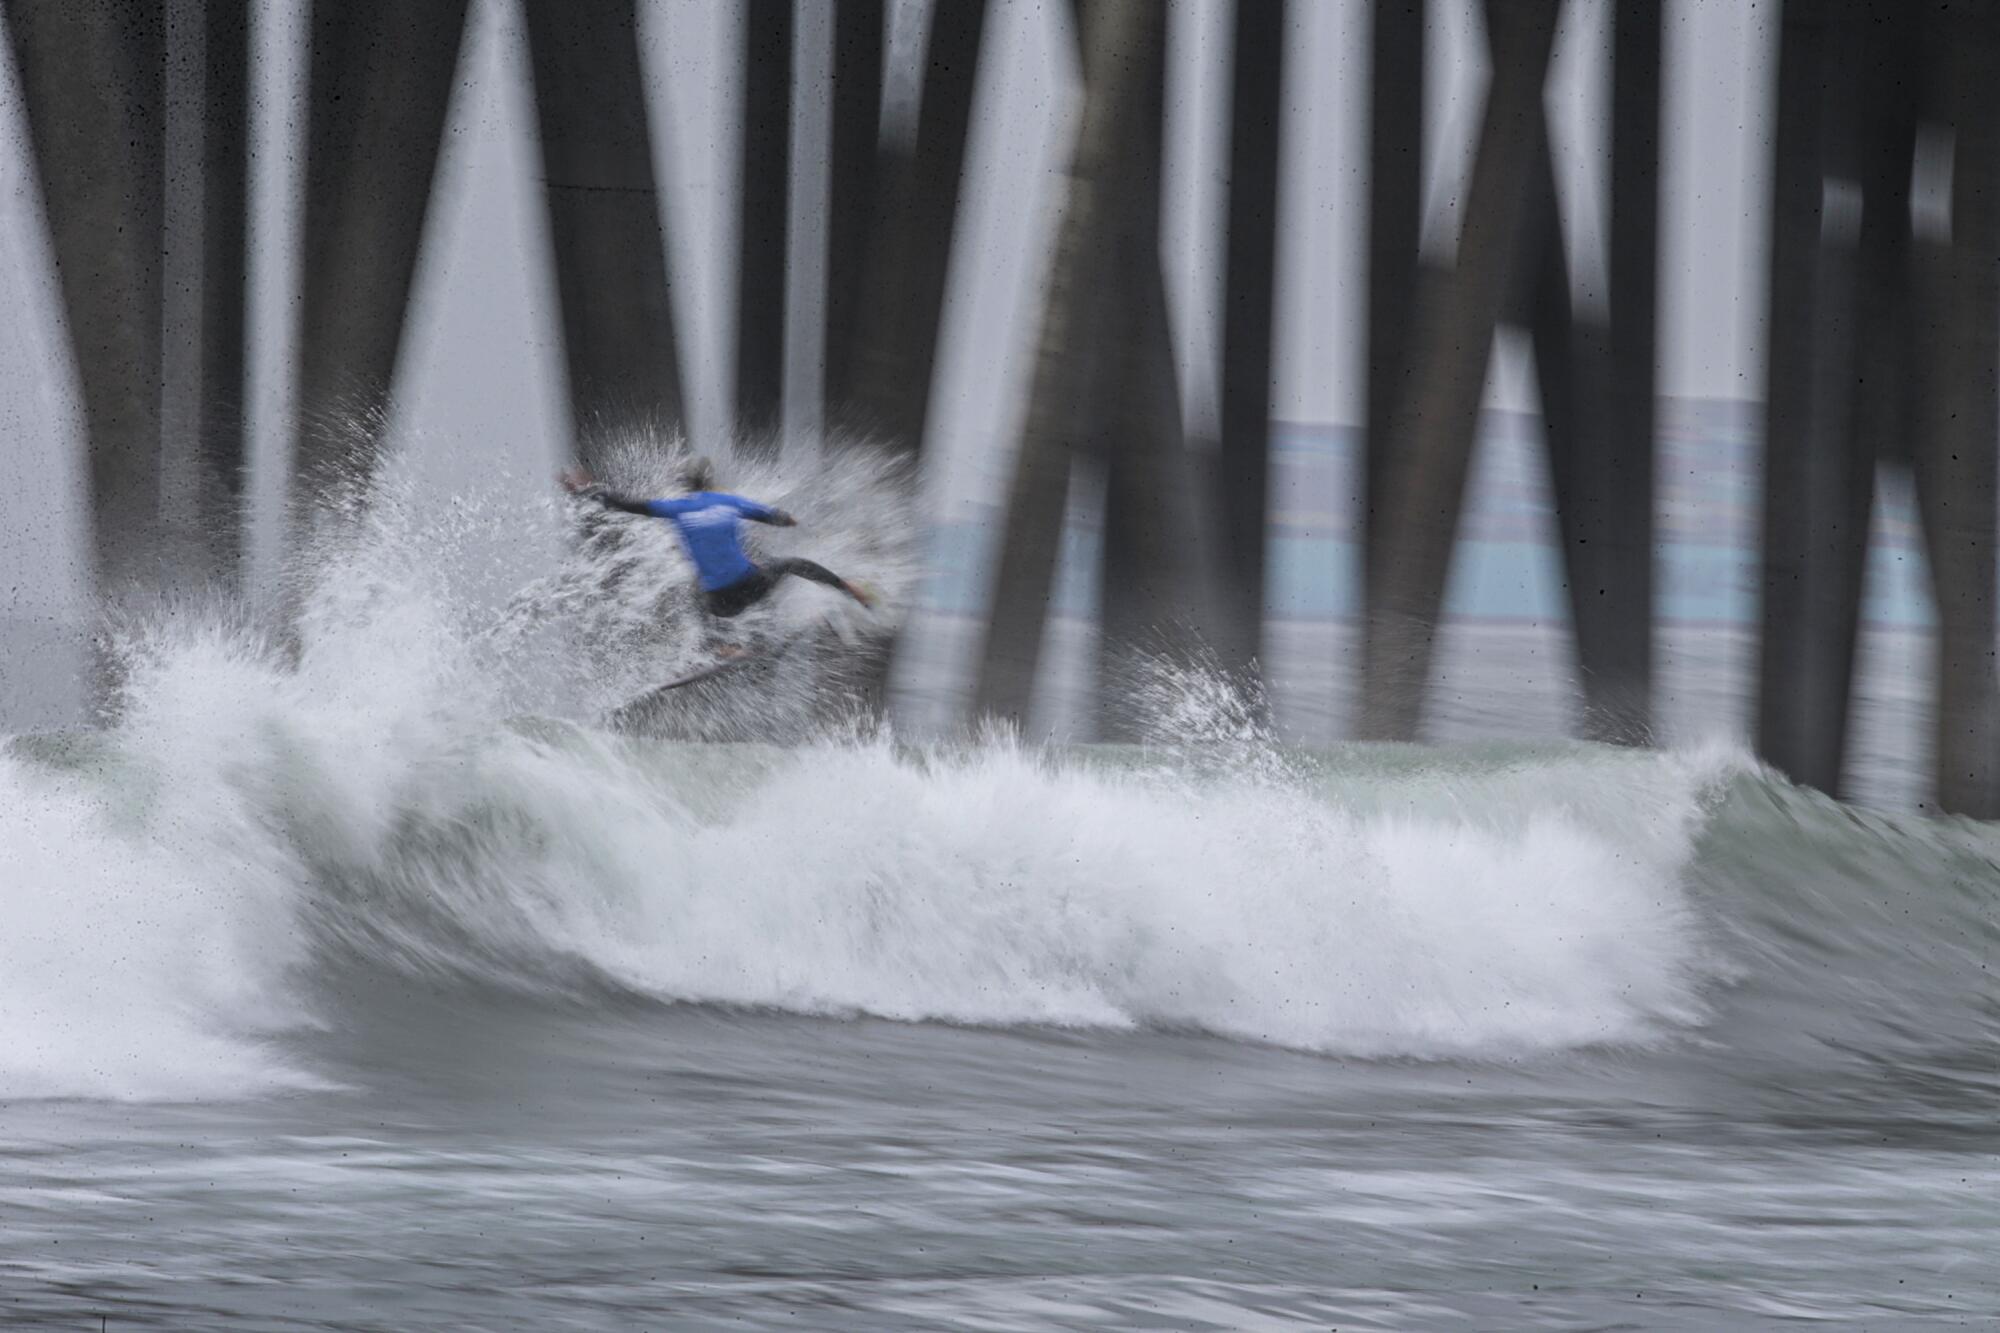 Kanoa Igarashi competes in a quarterfinal heat at the US Open of Surfing